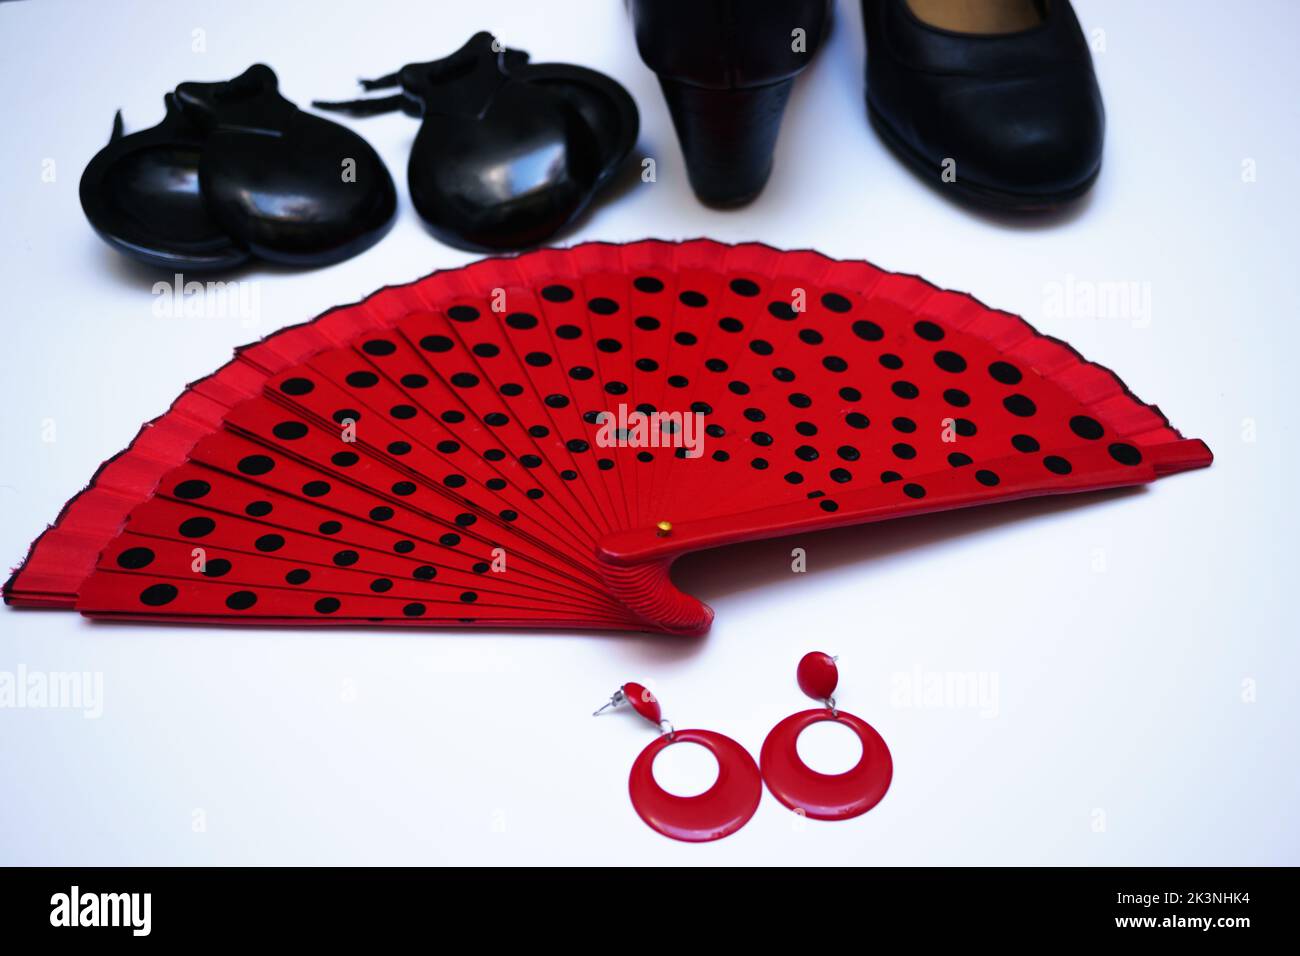 objects used in flamenco fan, castanets, high heel shoes and earrings on a white background Stock Photo